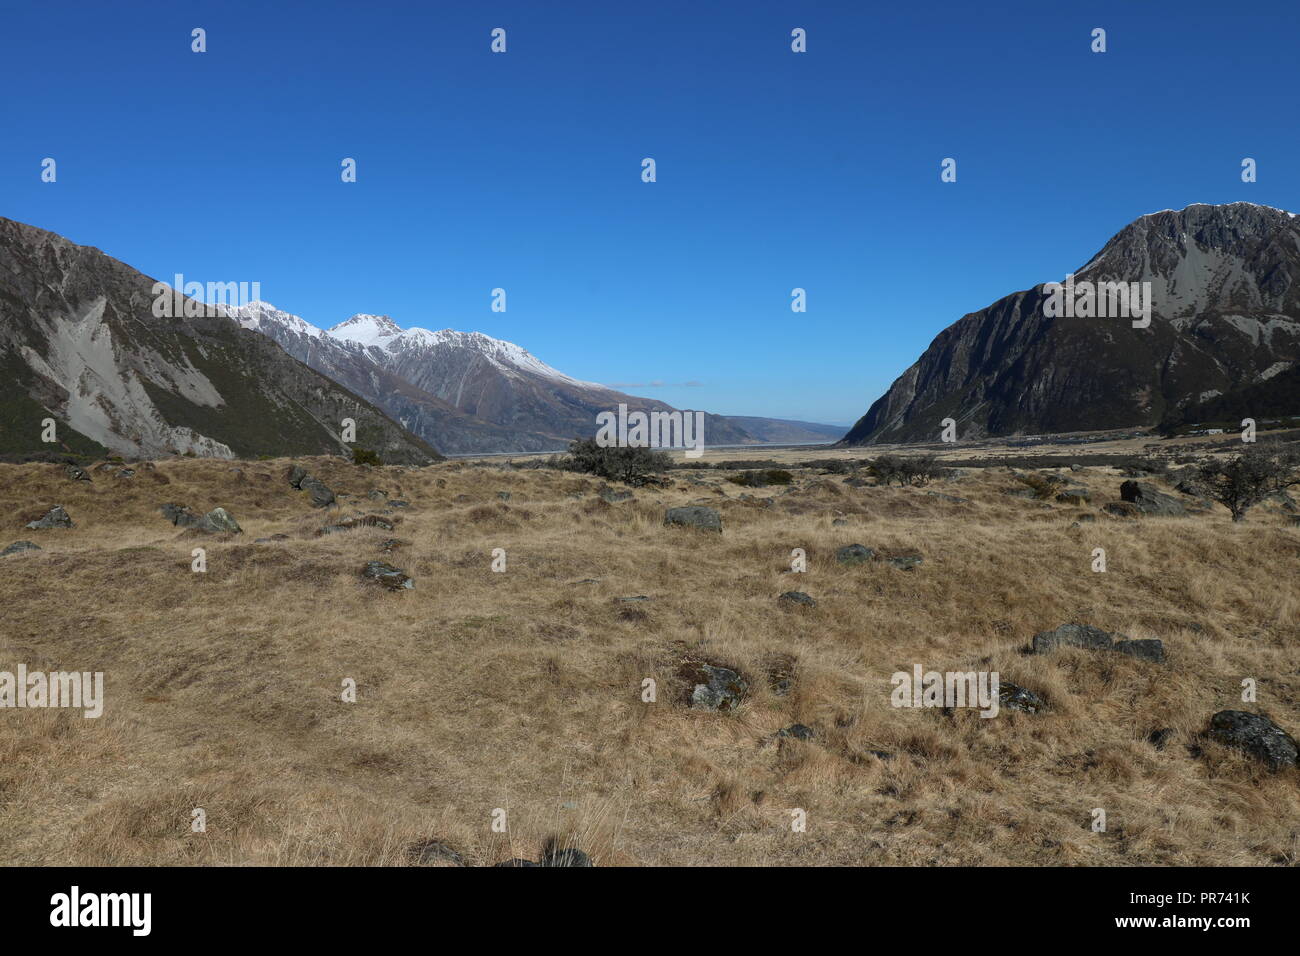 Mount Cook National Park and Hiking the Hooker Valley track, Stock Photo